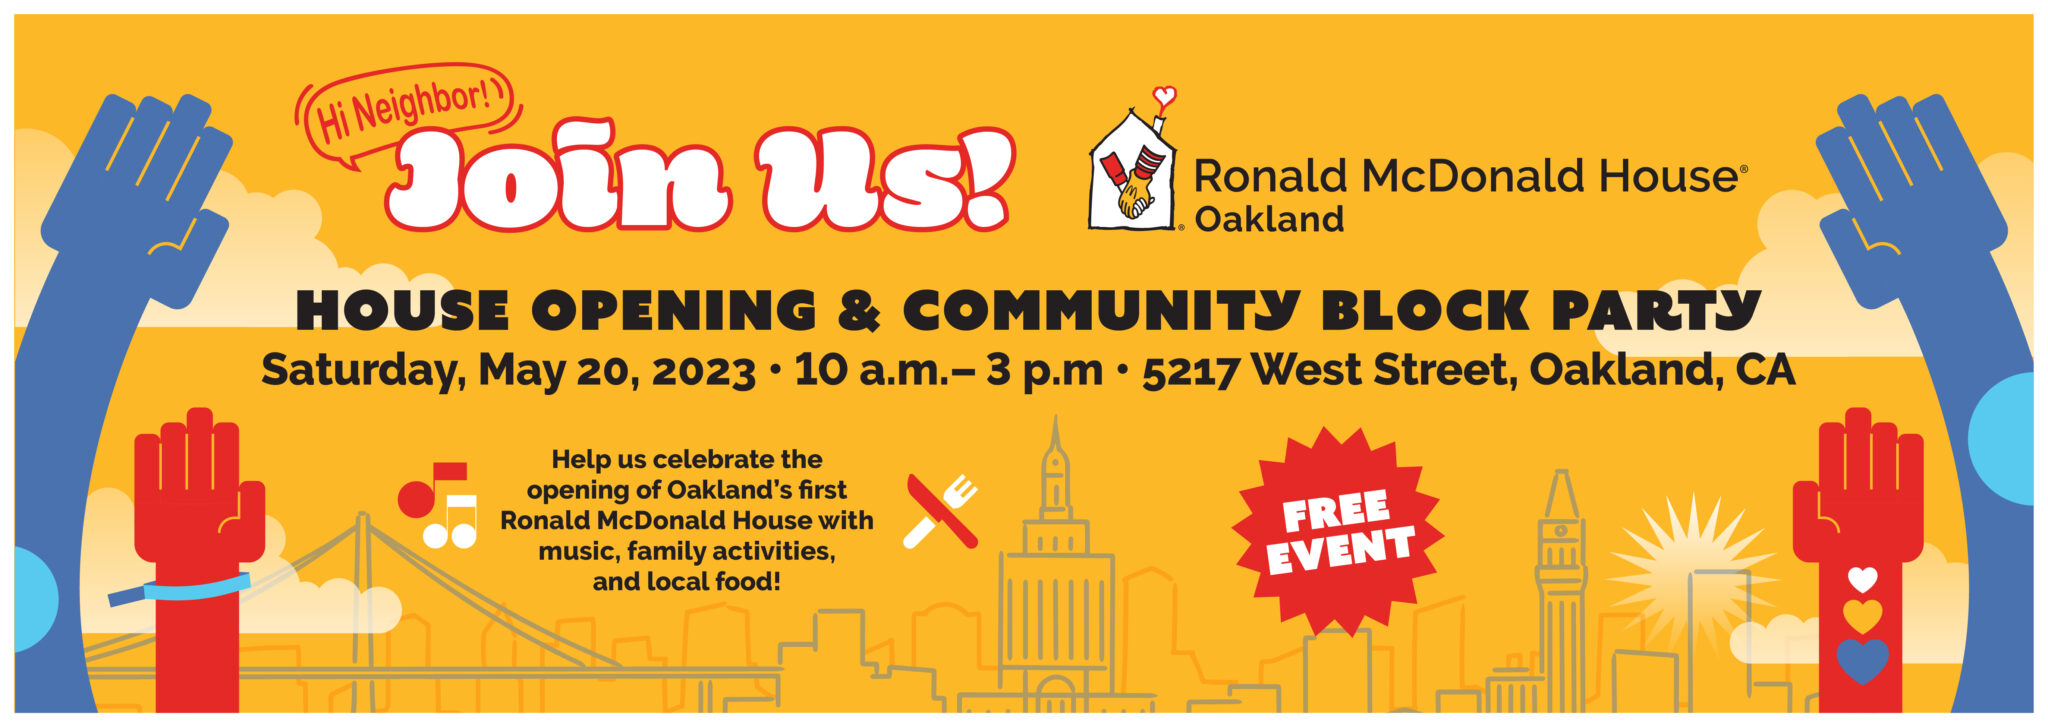 Colorful illustration of Oakland skyline, advertising the free event to celebrate the Opening & Block Party of Ronald McDonald House Oakland on Saturday, May 20, 10am-3pm at 5217 West Street, Oakland, CA.